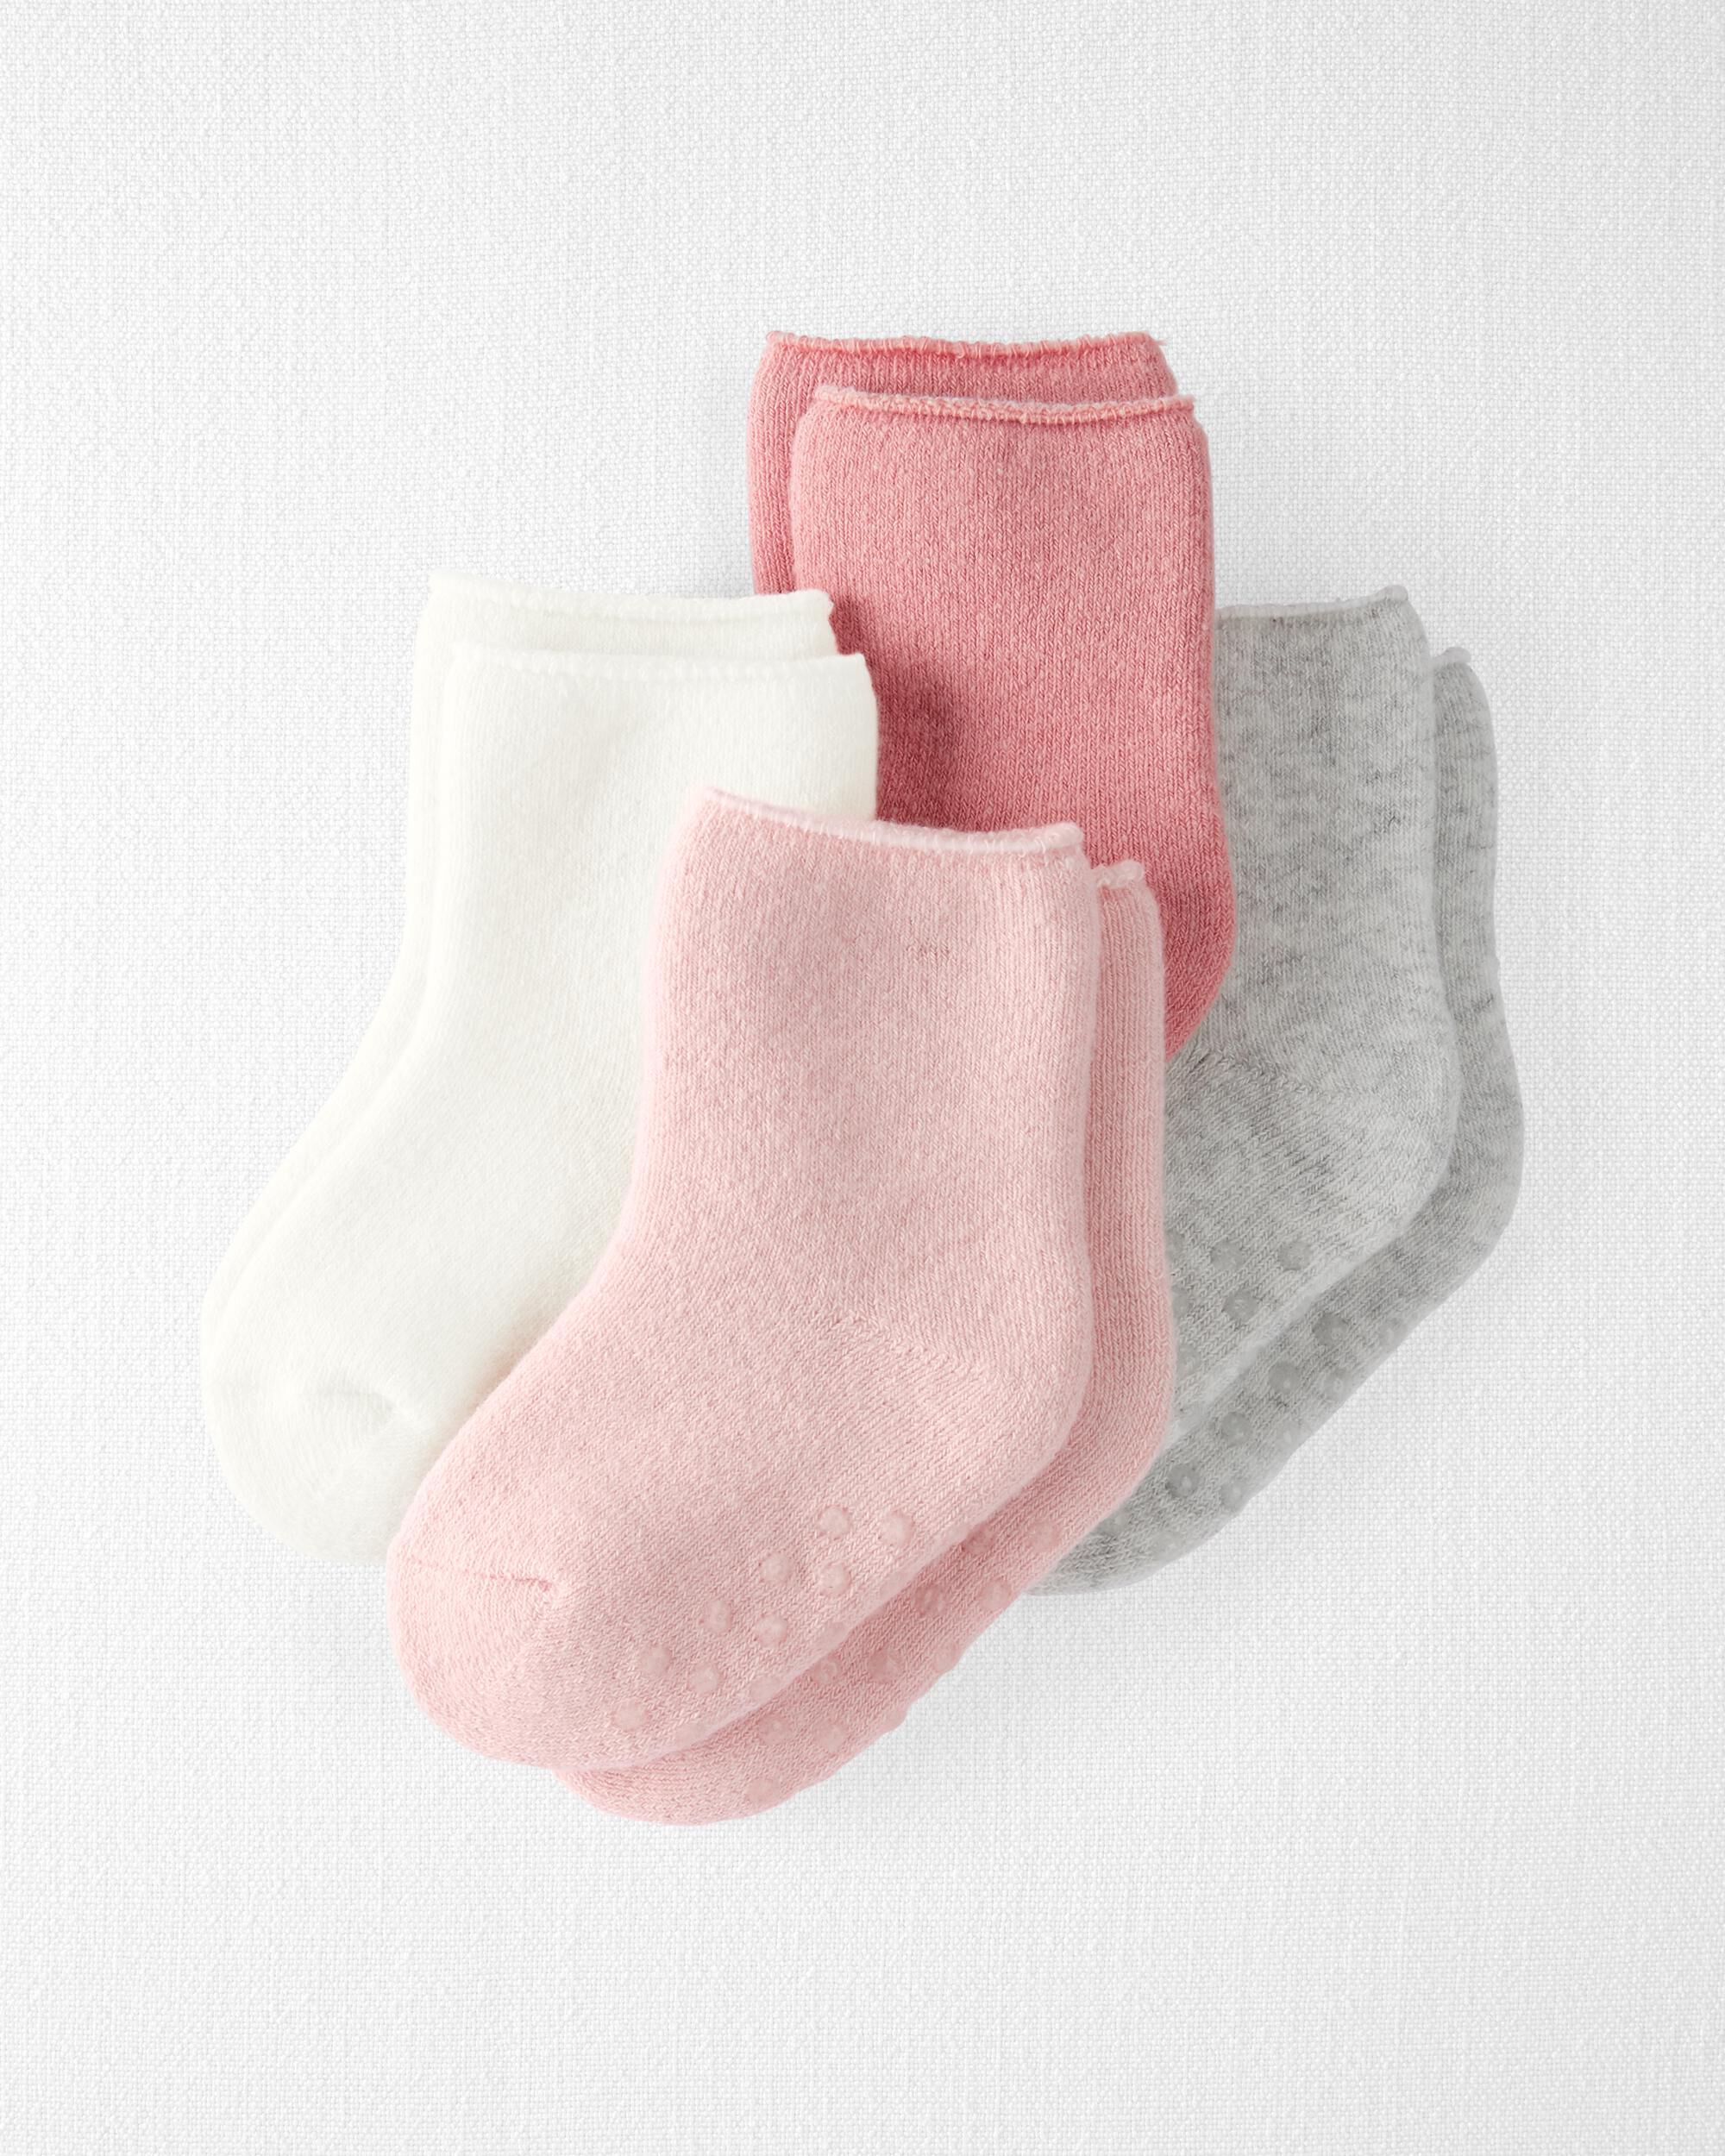 4T/5T Pink/Gray/White Simple Joys by Carters Baby Girls Toddler 12-Pack Socks